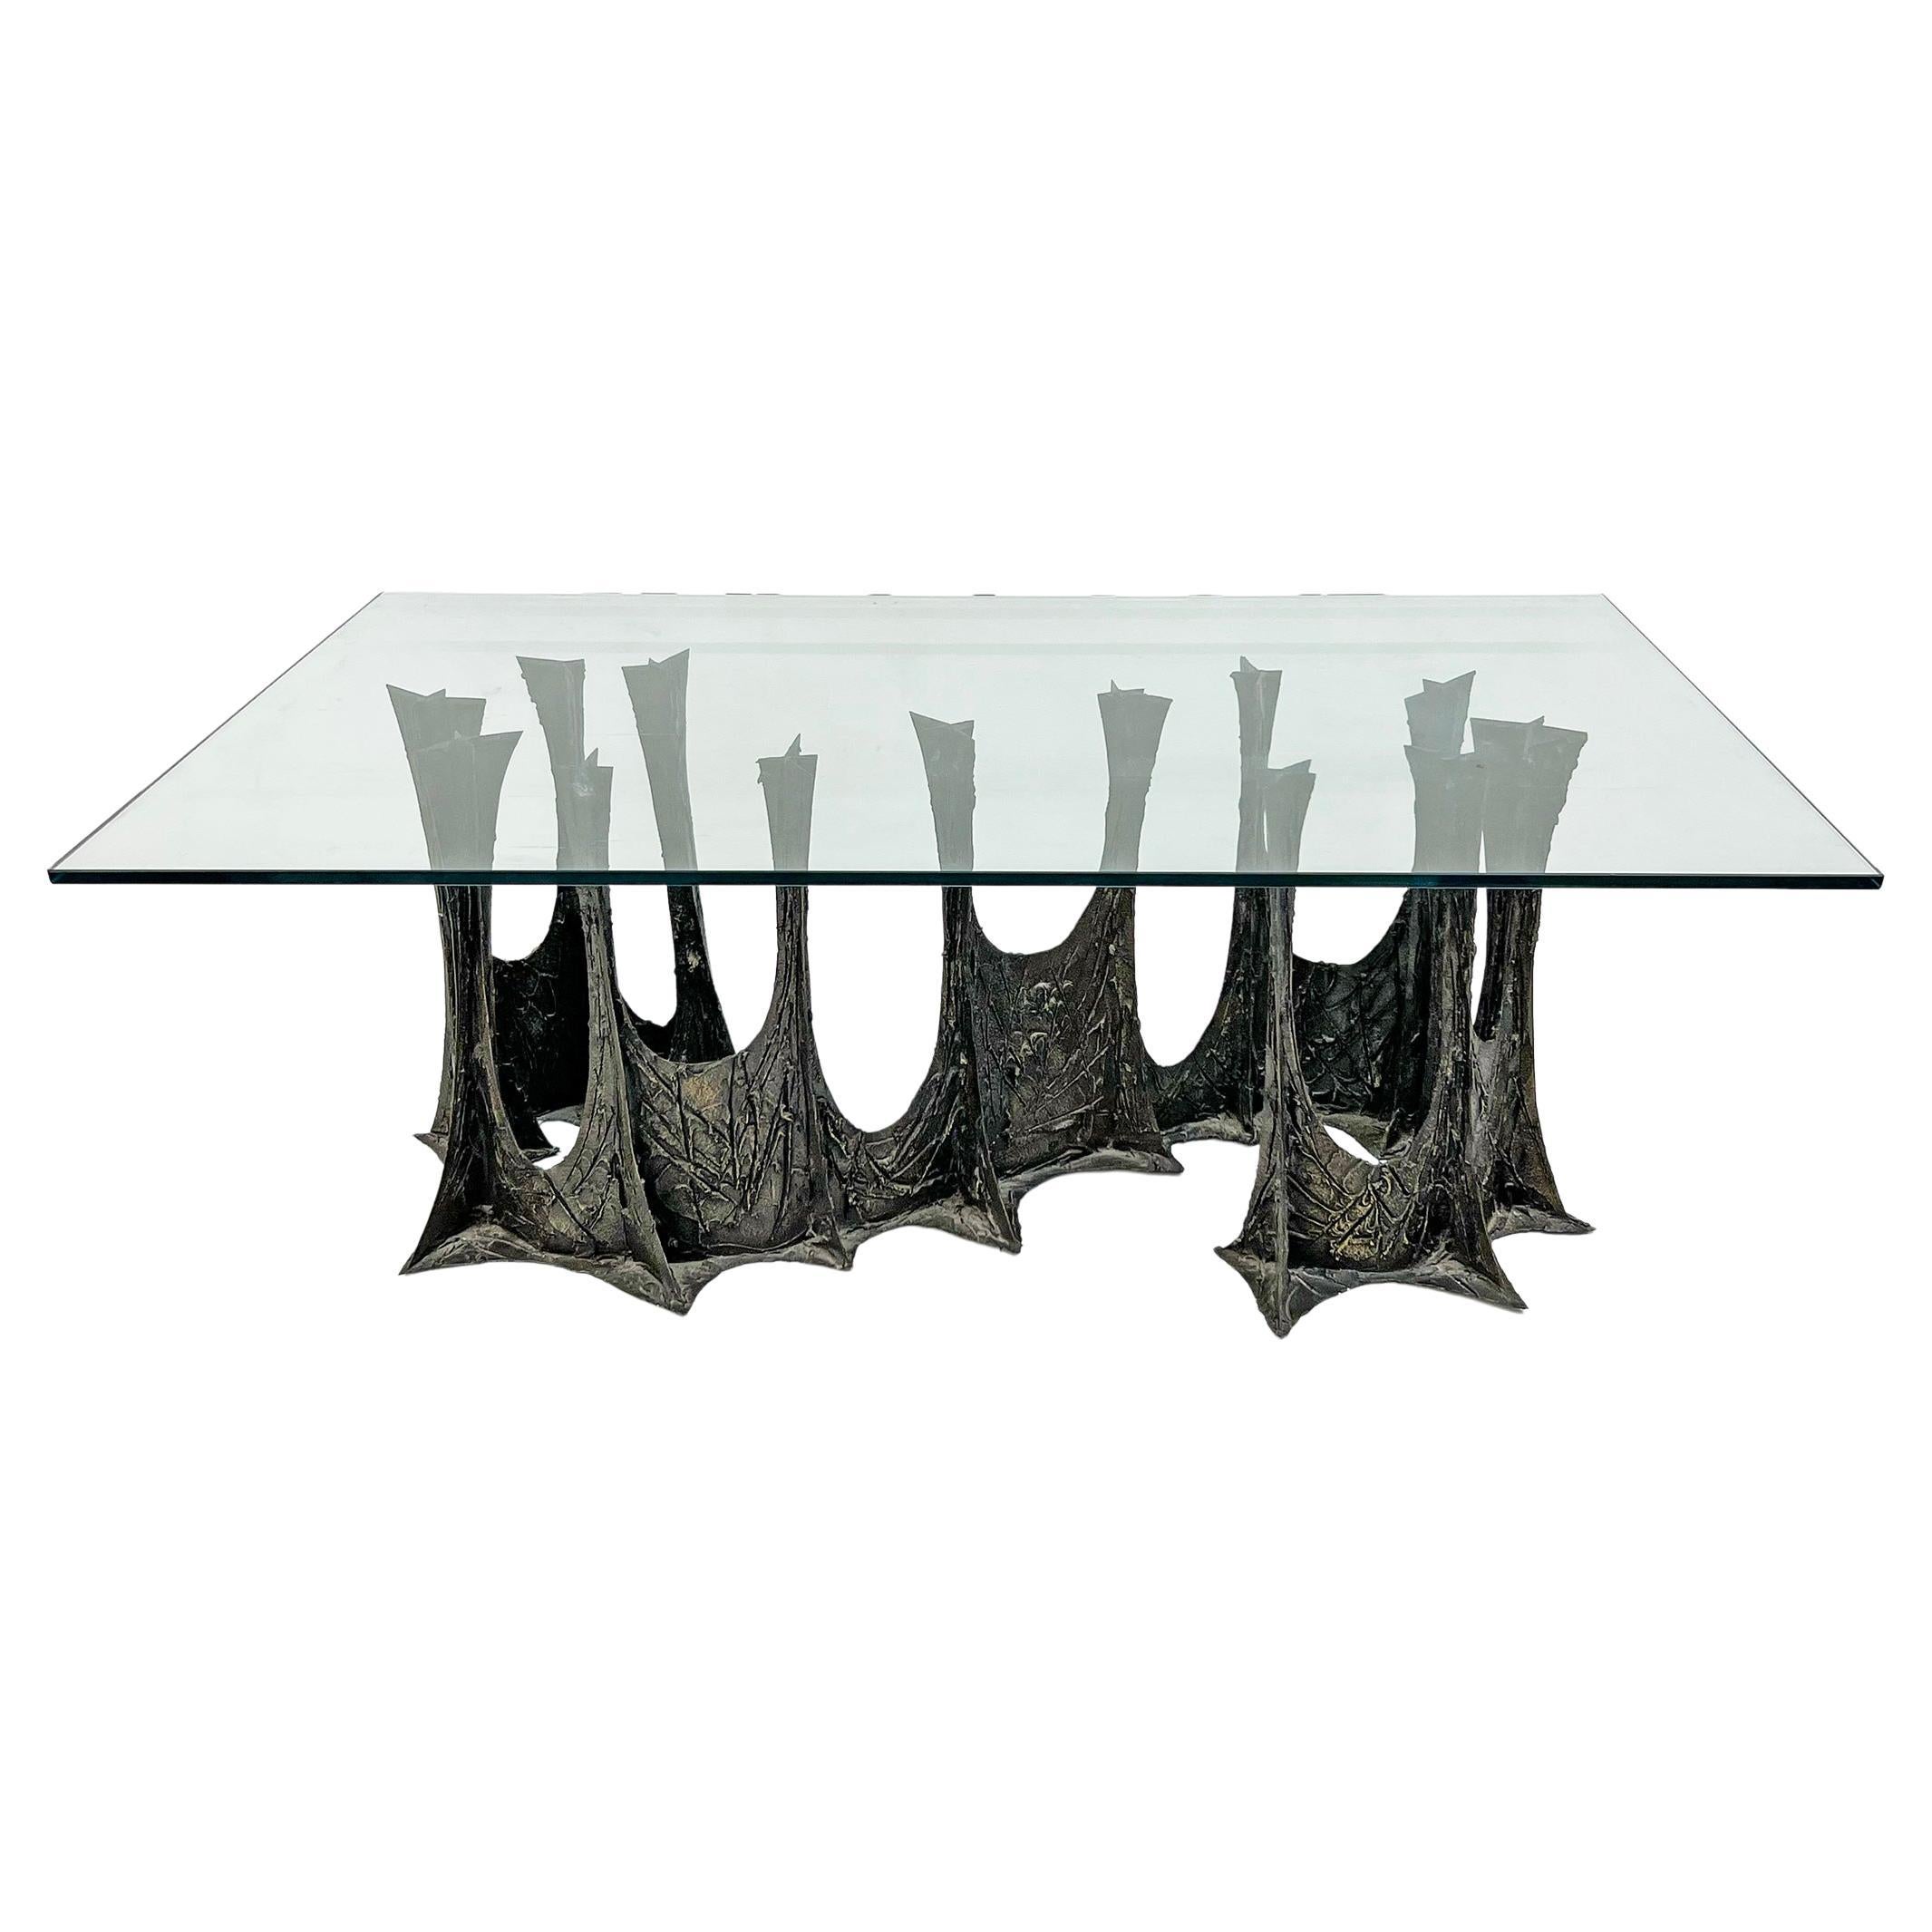 Paul Evans Stalagmite Bronze and Resin Dining Table PE102, Signed and Dated 1970